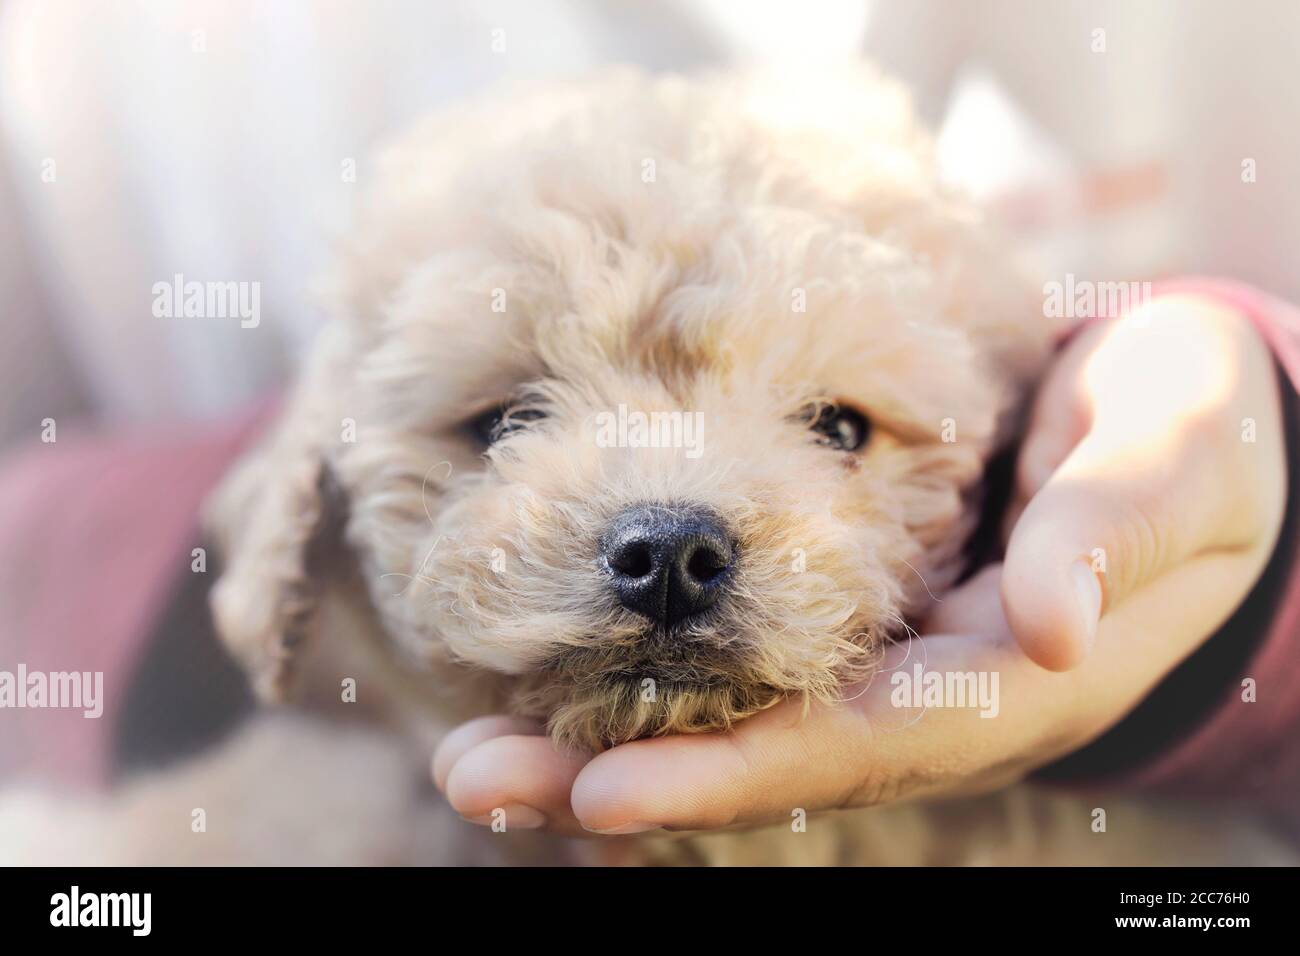 Little boy kissing gently his puppy Stock Photo